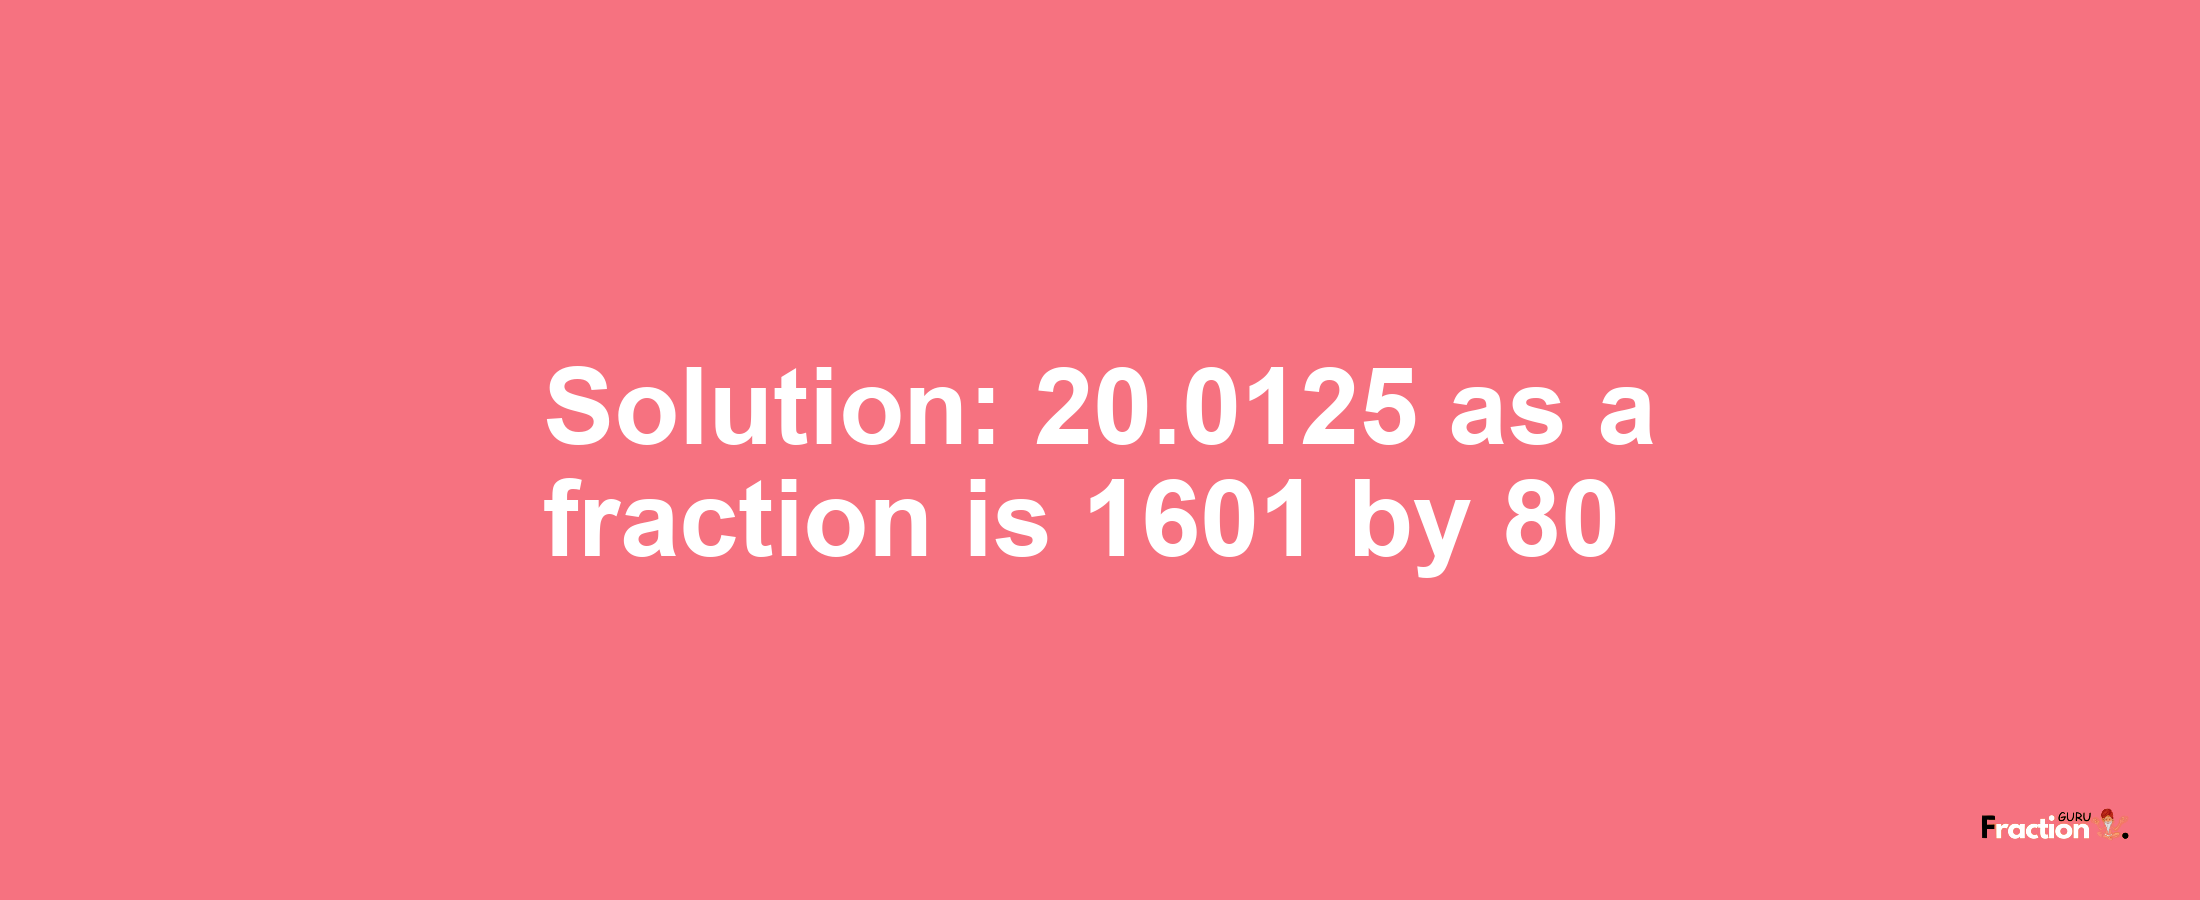 Solution:20.0125 as a fraction is 1601/80